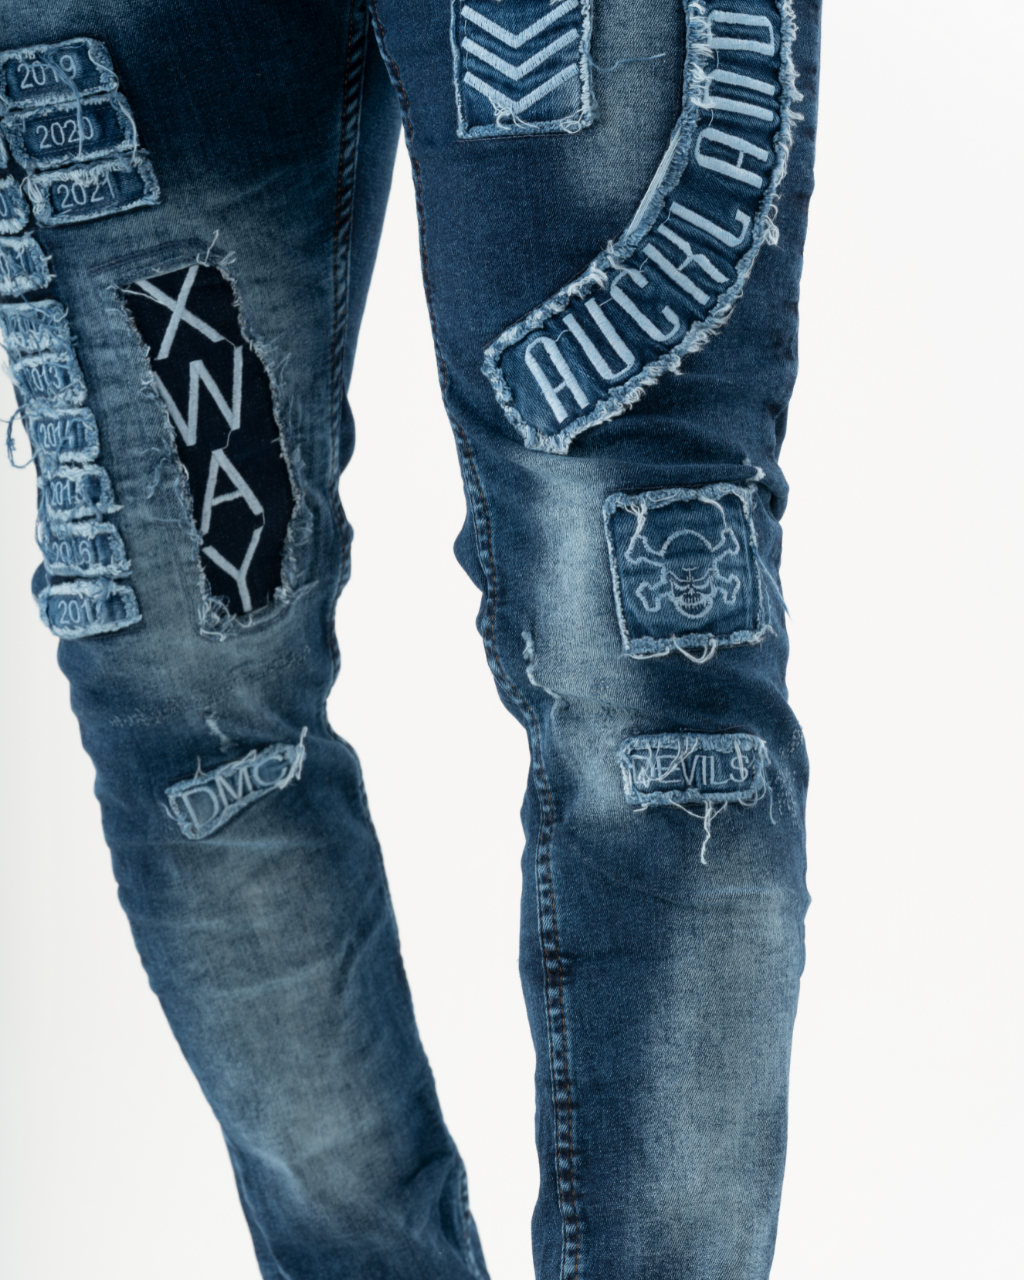 A man wearing a pair of INJUN | BLUE jeans with patches on them.